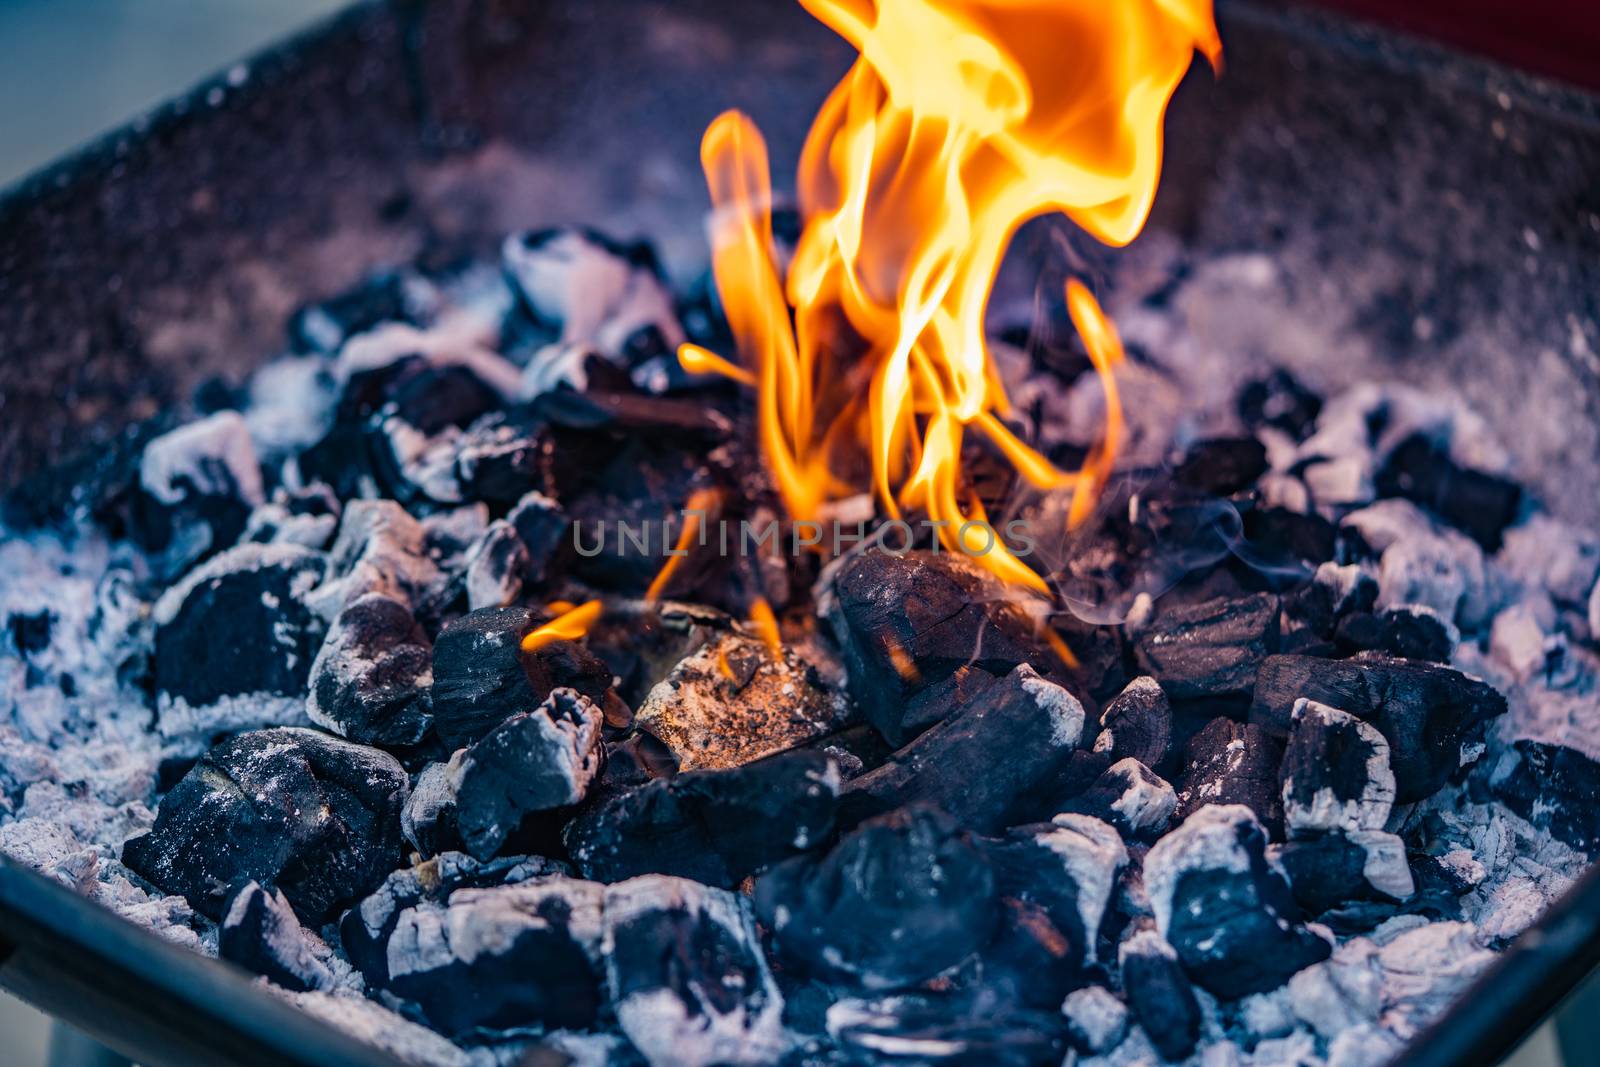 A close up of a fire from a barbecue or fire pit